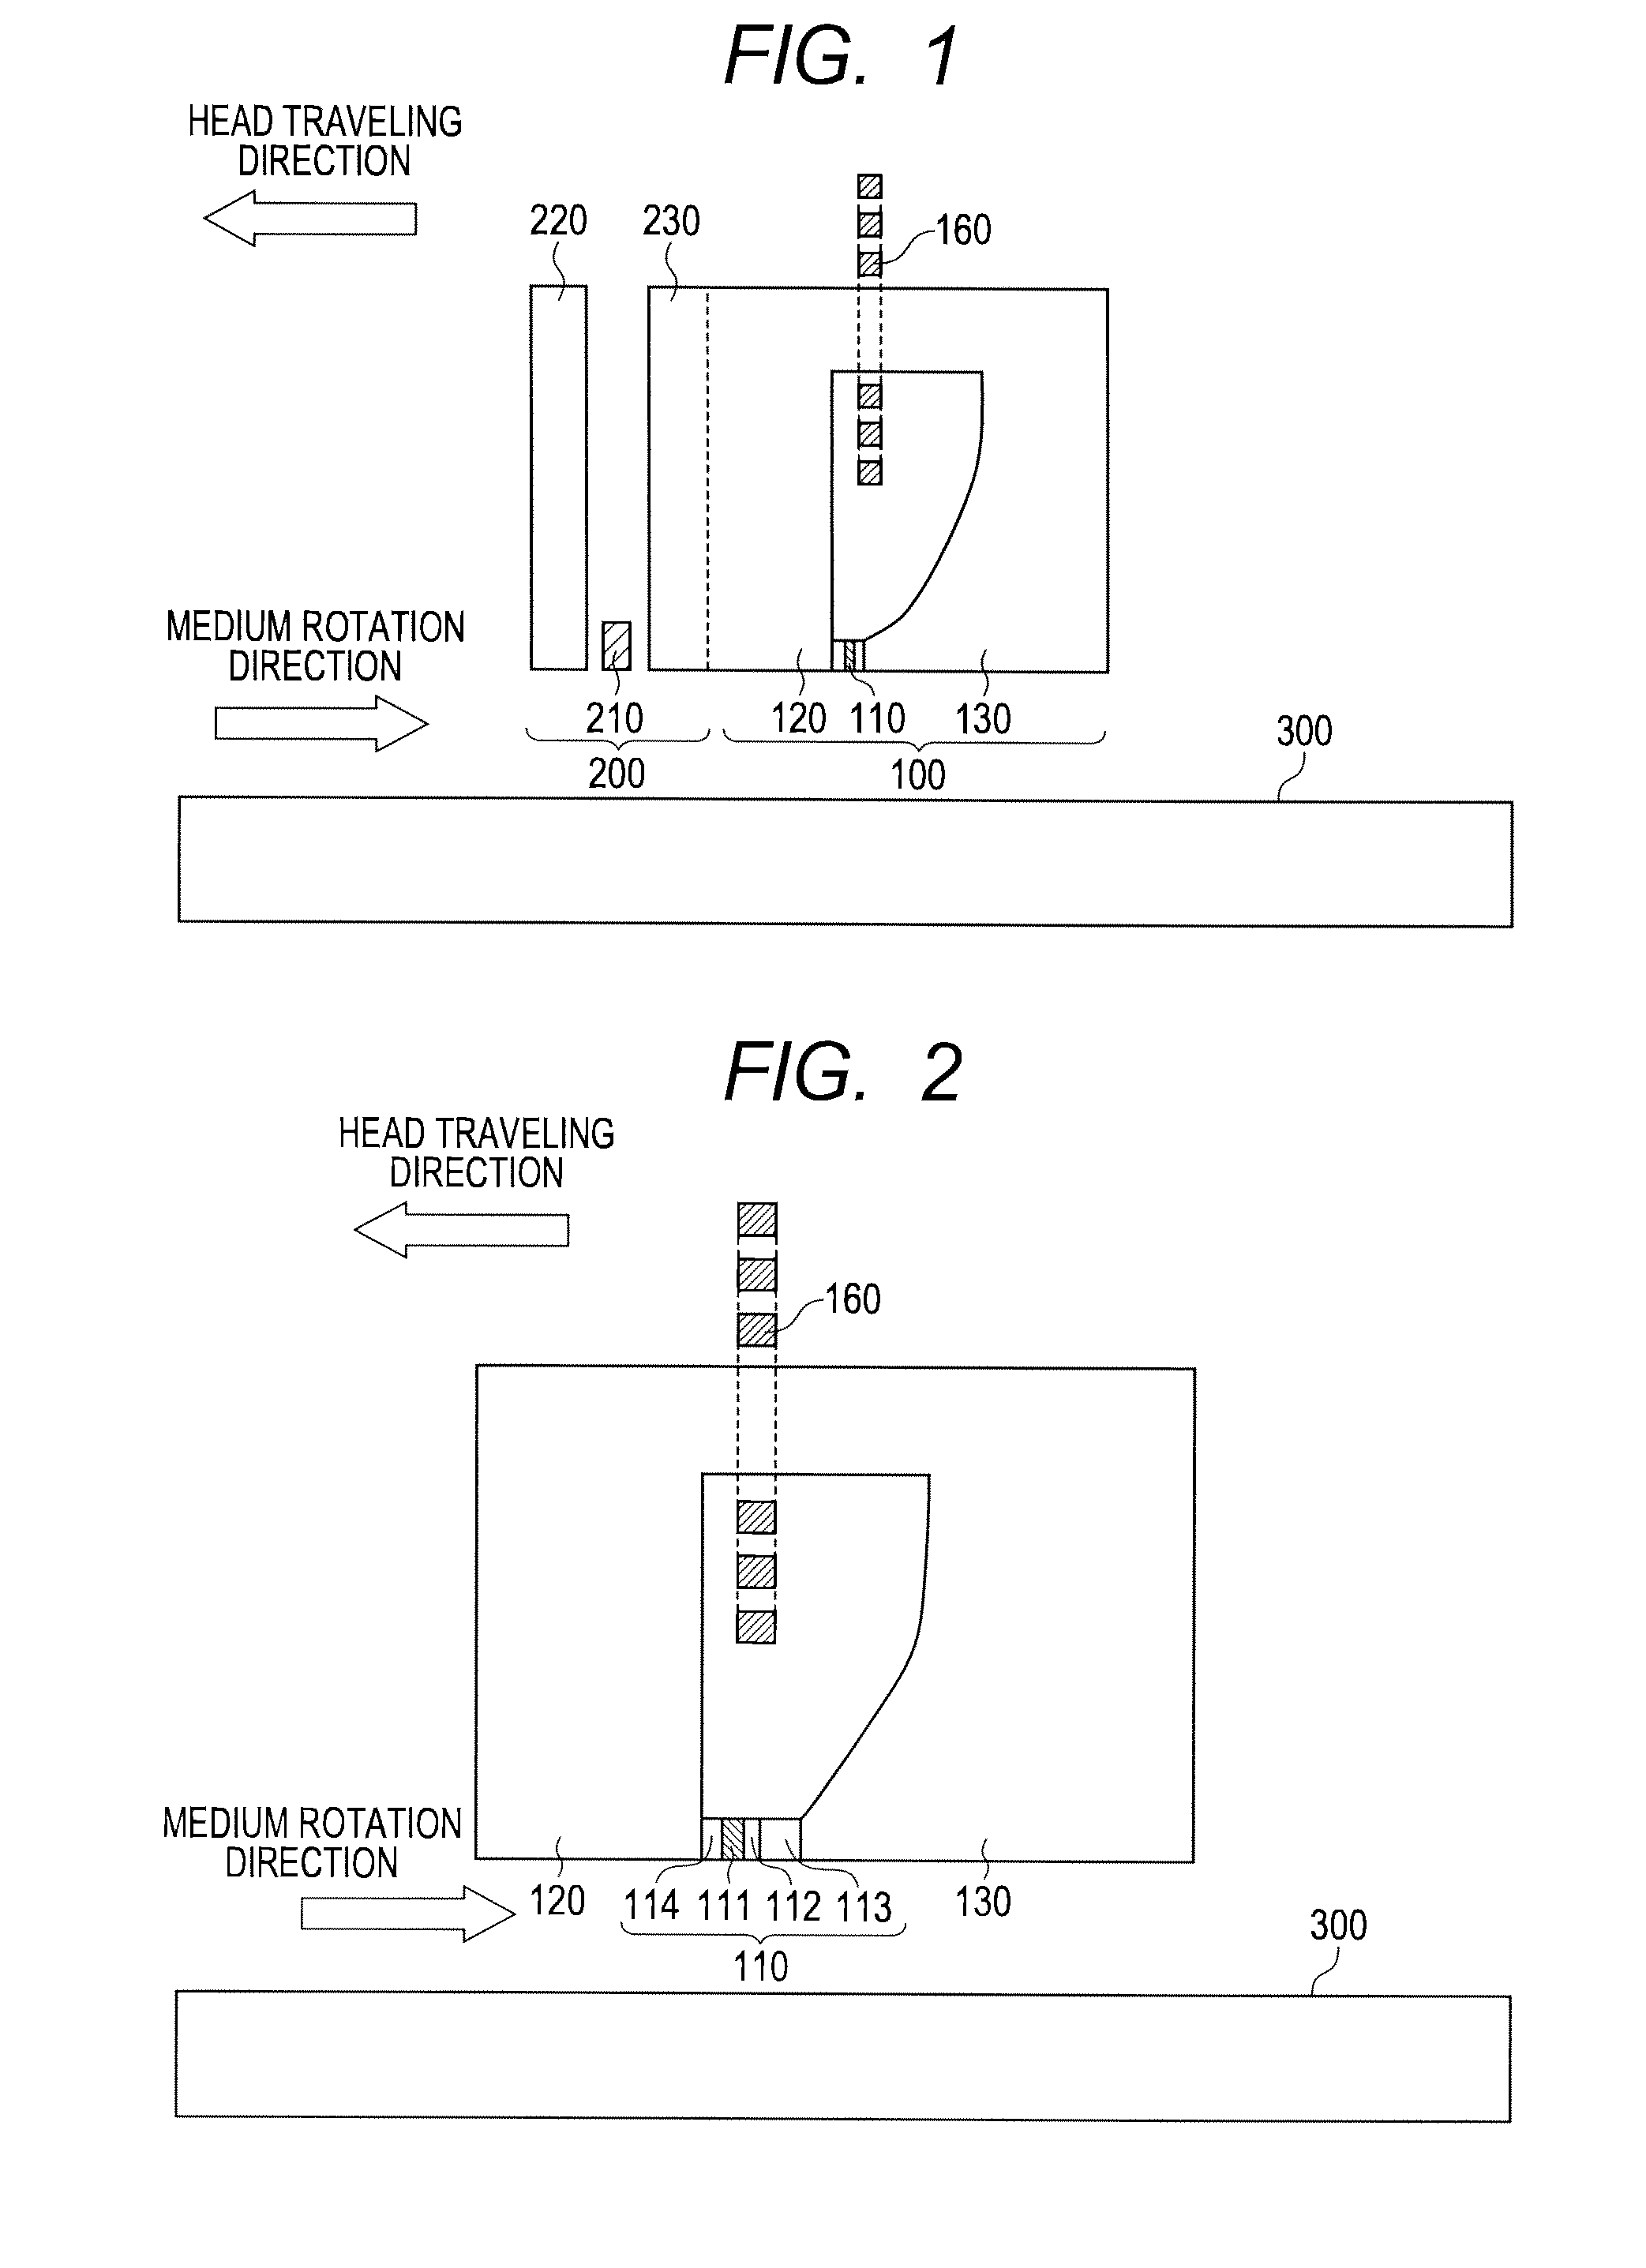 Spin-torque oscillator for microwave assisted magnetic recording